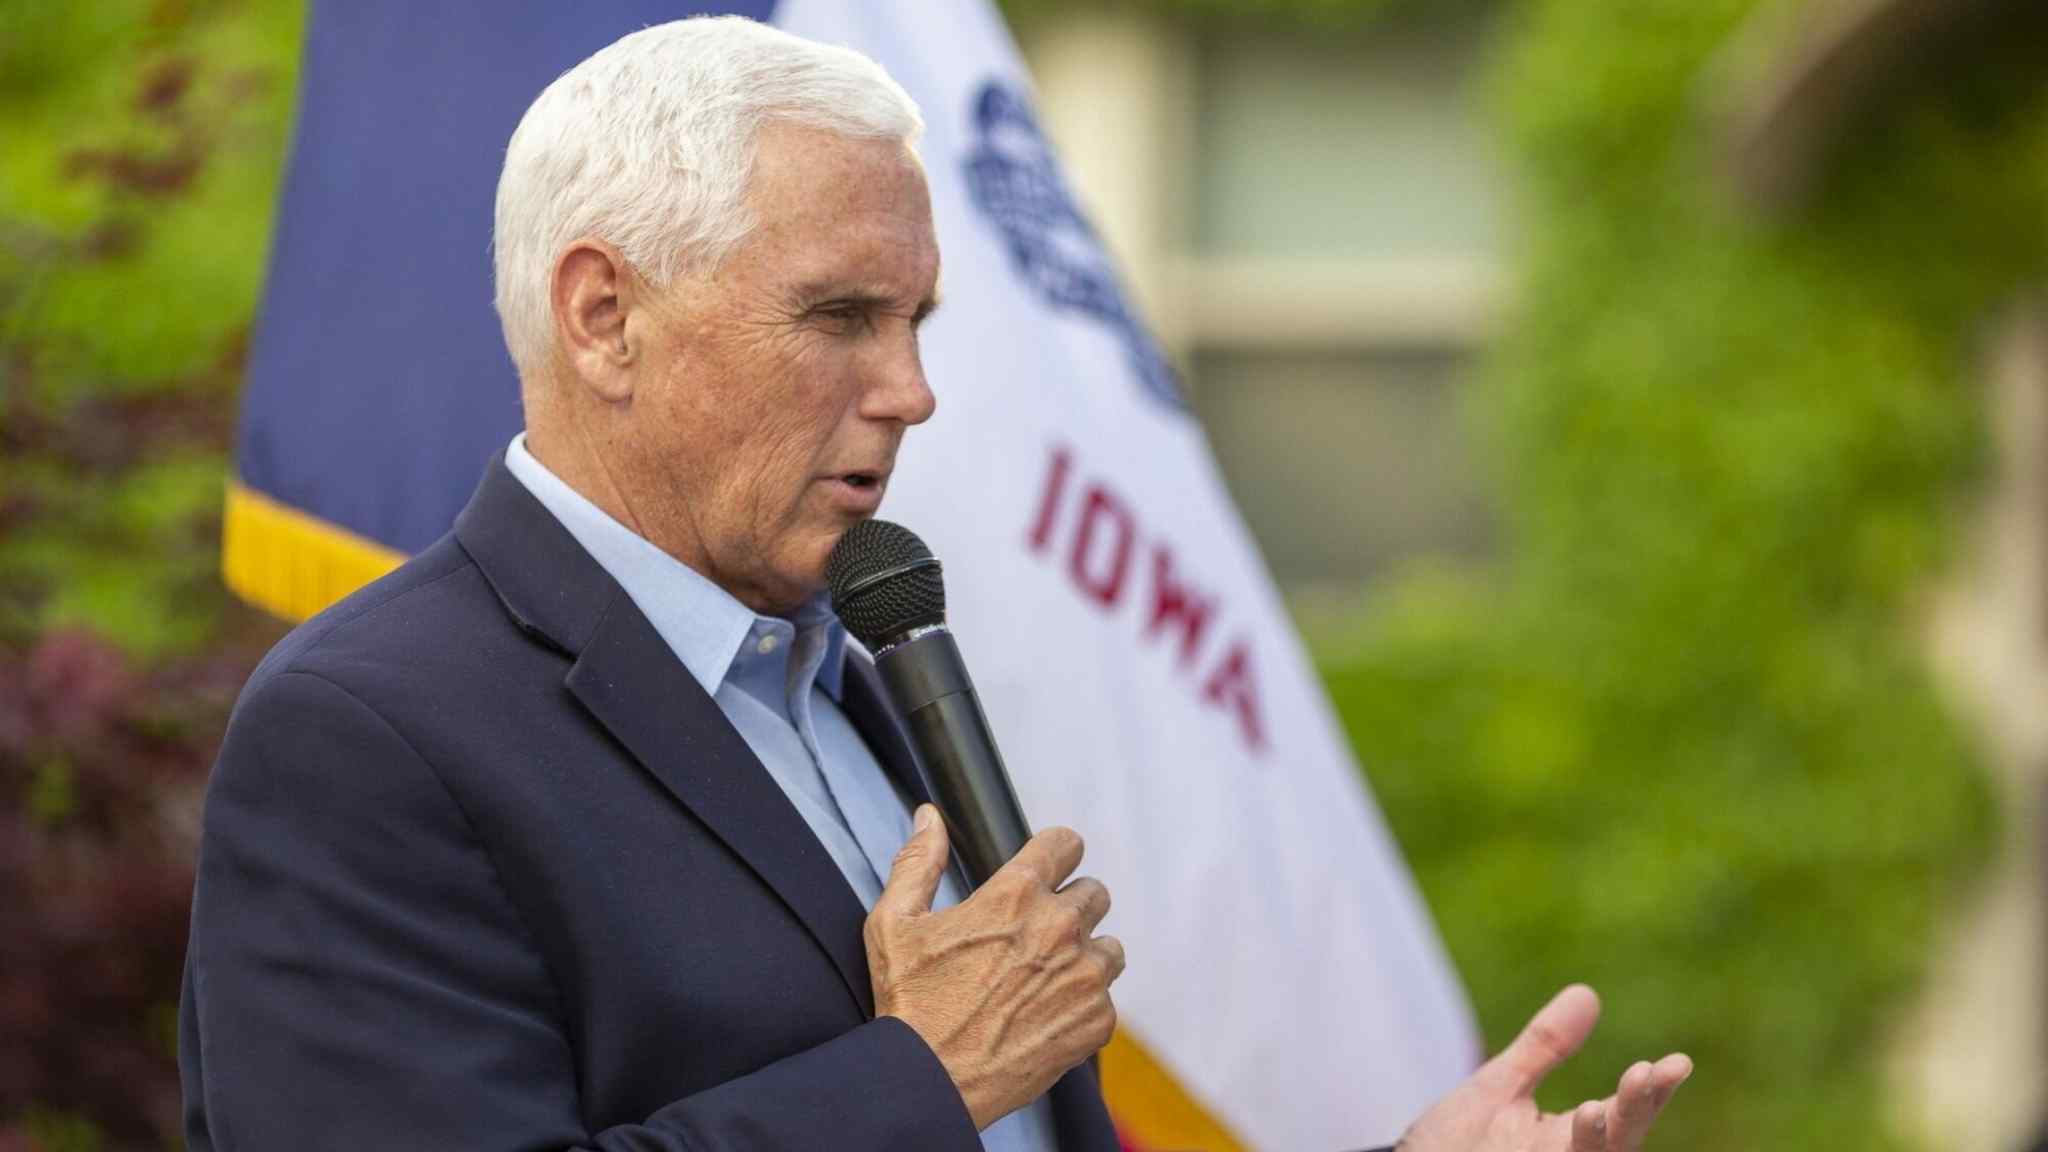 Mike Pence enters 2024 US presidential race